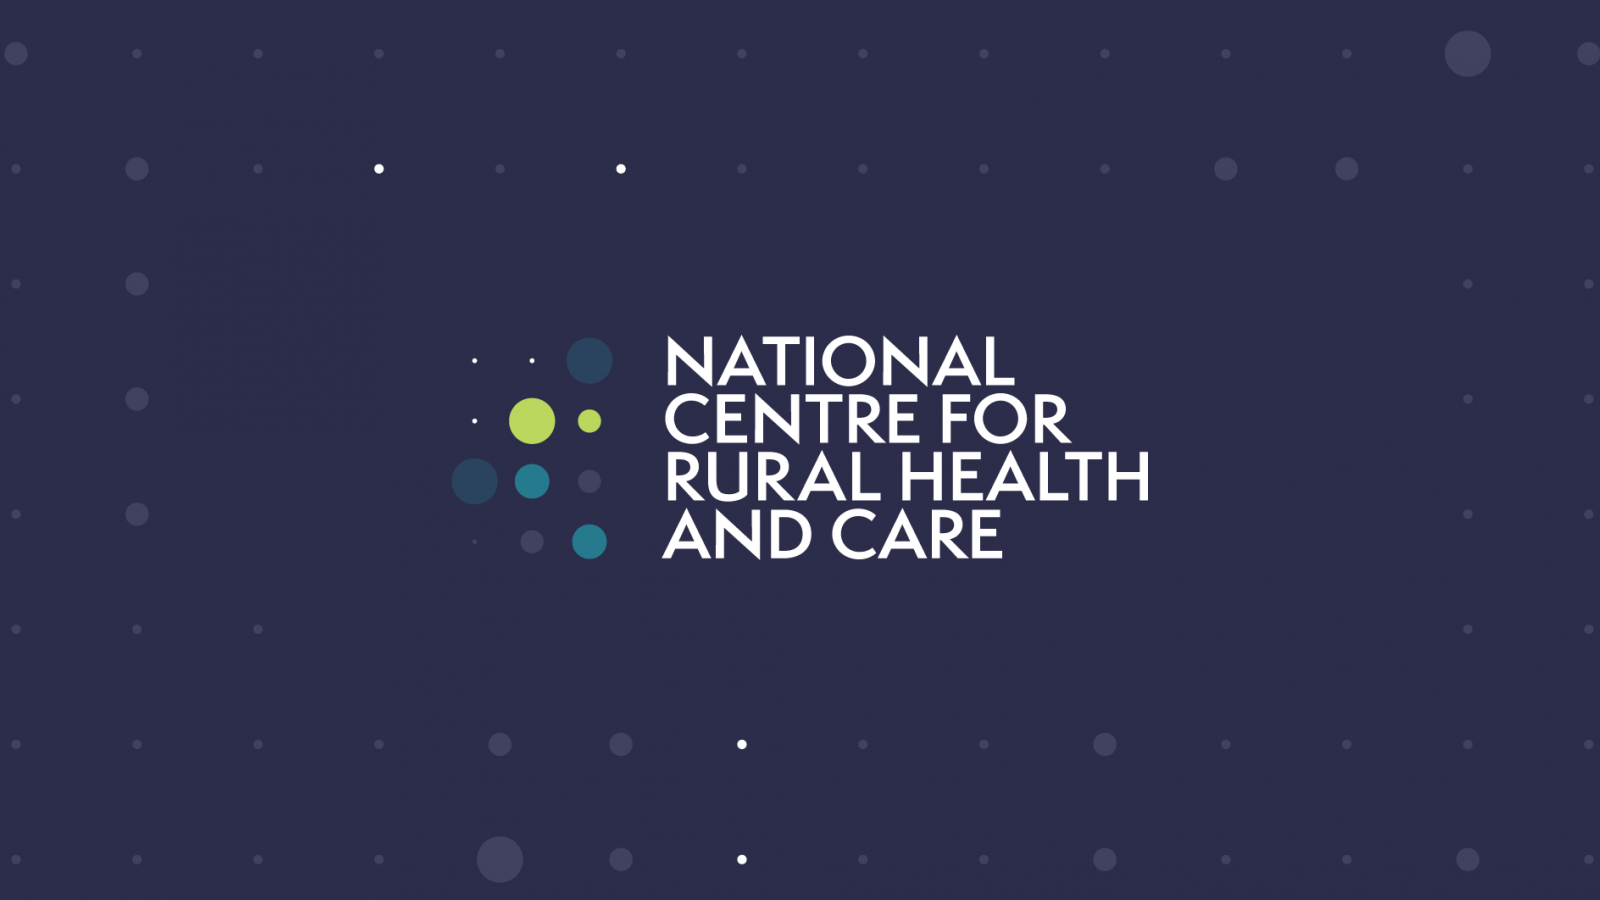 Launch of National Centre for Rural Health and Care